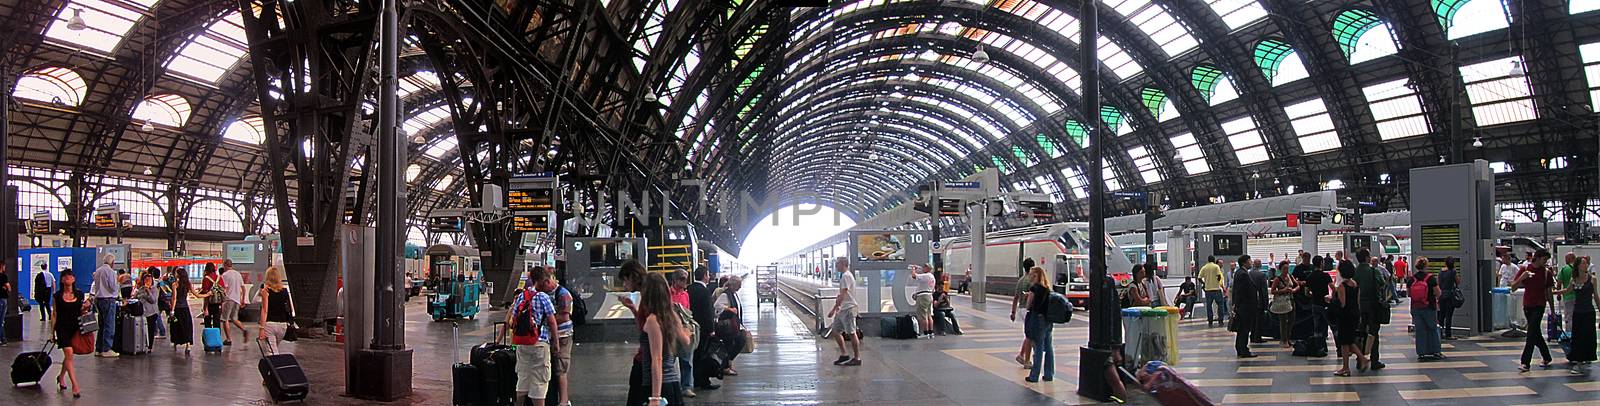 Panoramic illustration of a trains station in Milan Italy